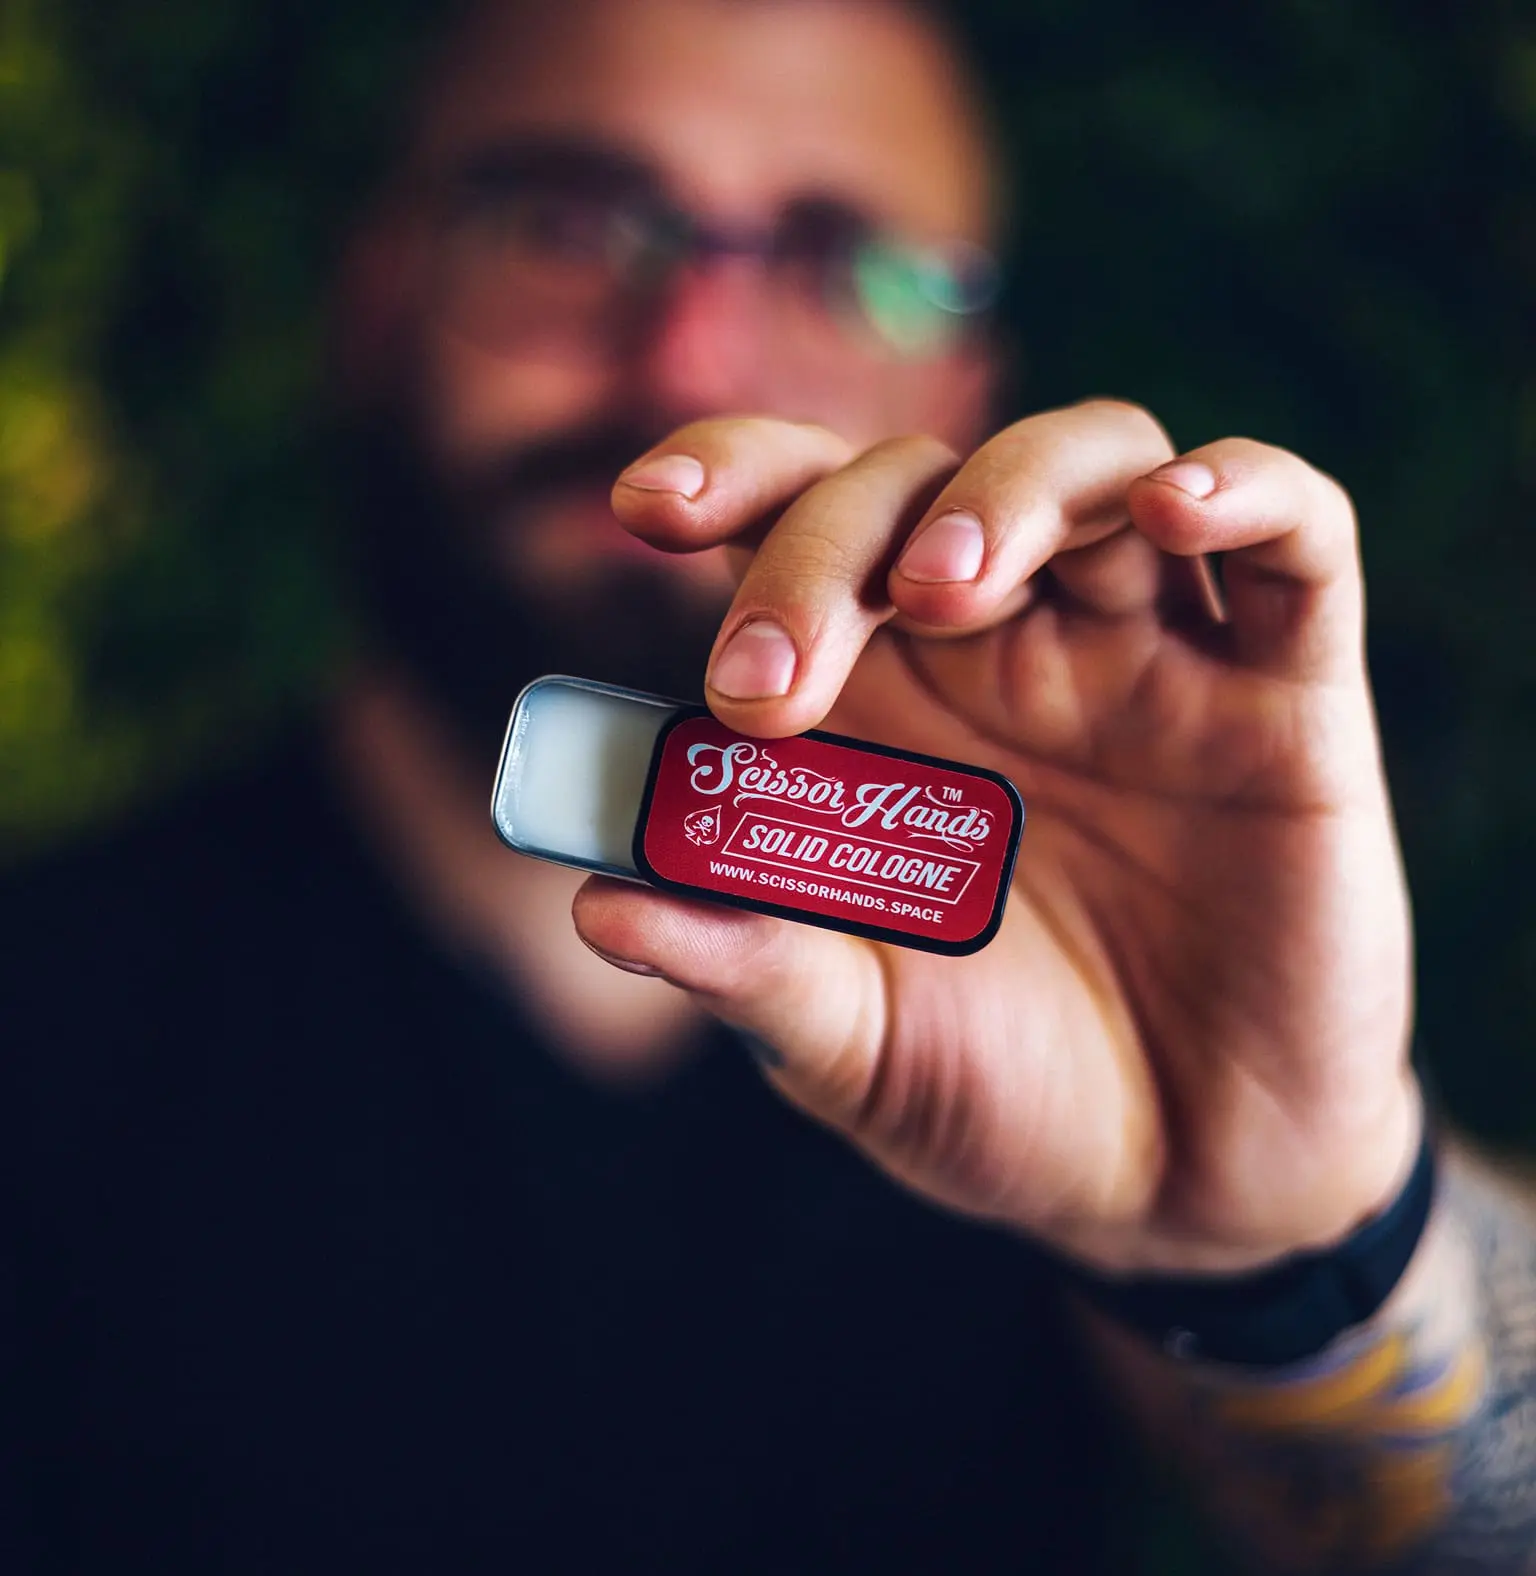 SOLID COLOGNE RED